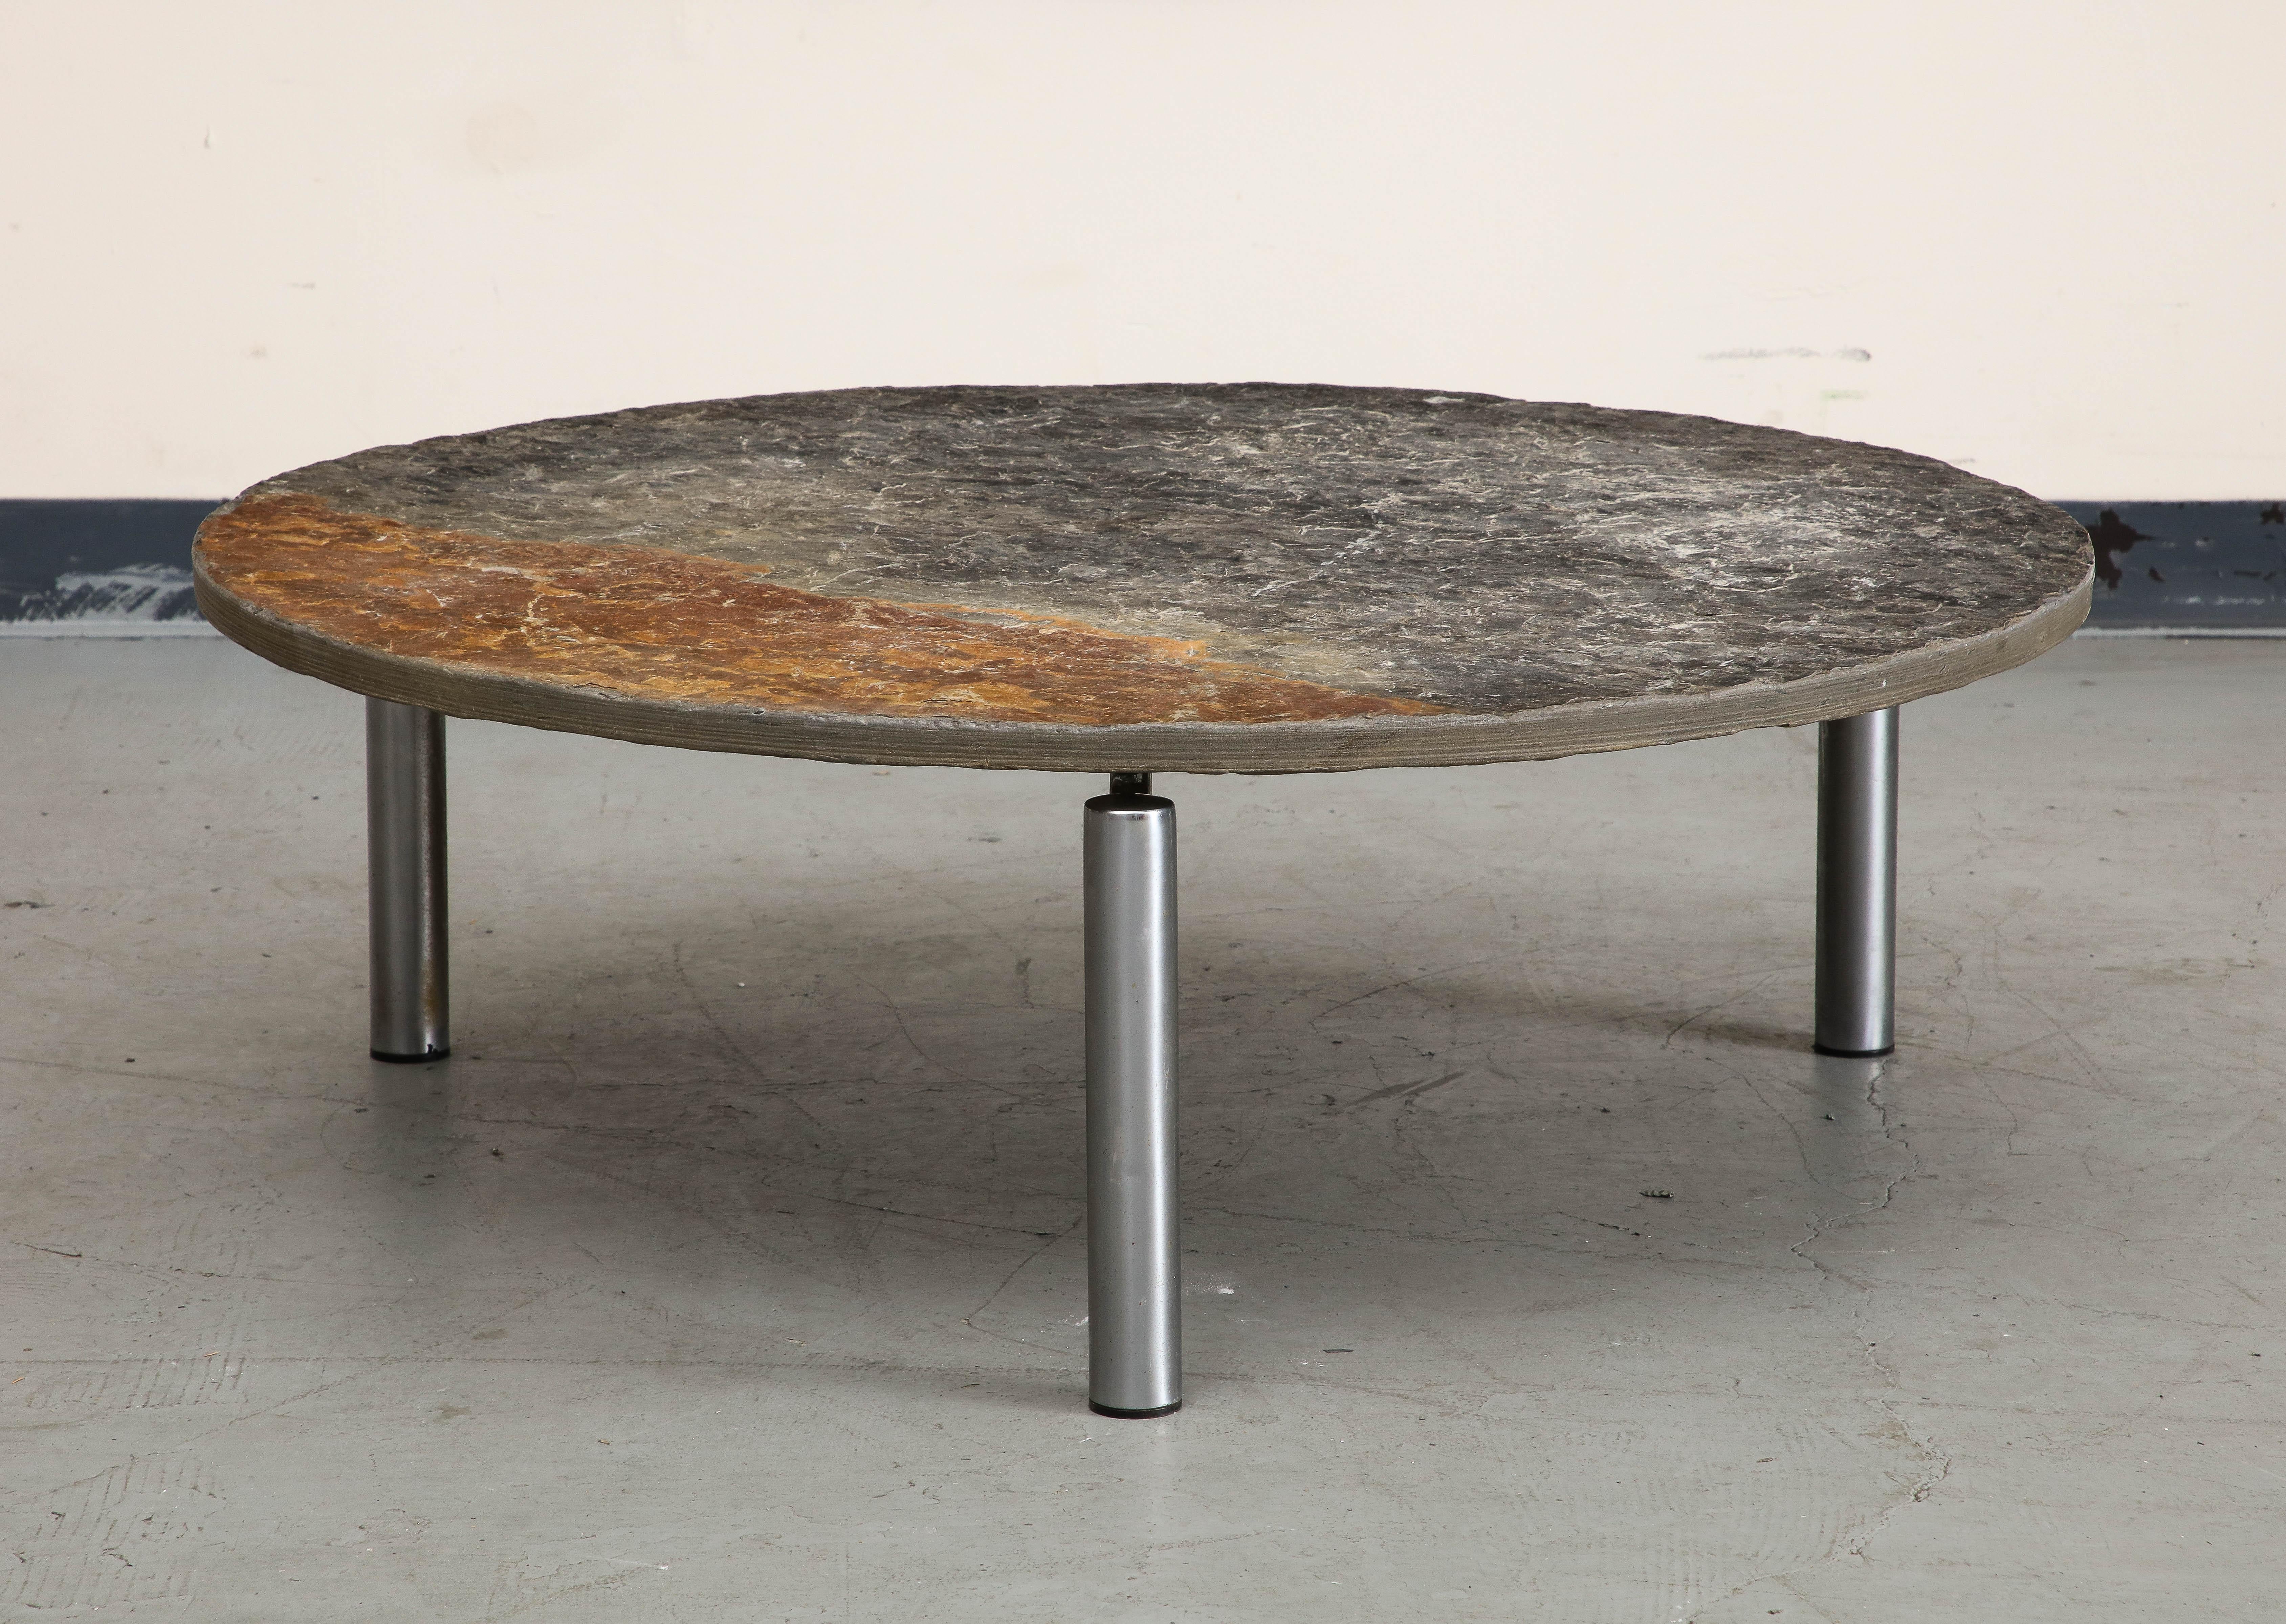 20th Century French Midcentury Chromed Steel Coffee Table with Round Natural Slate Top For Sale